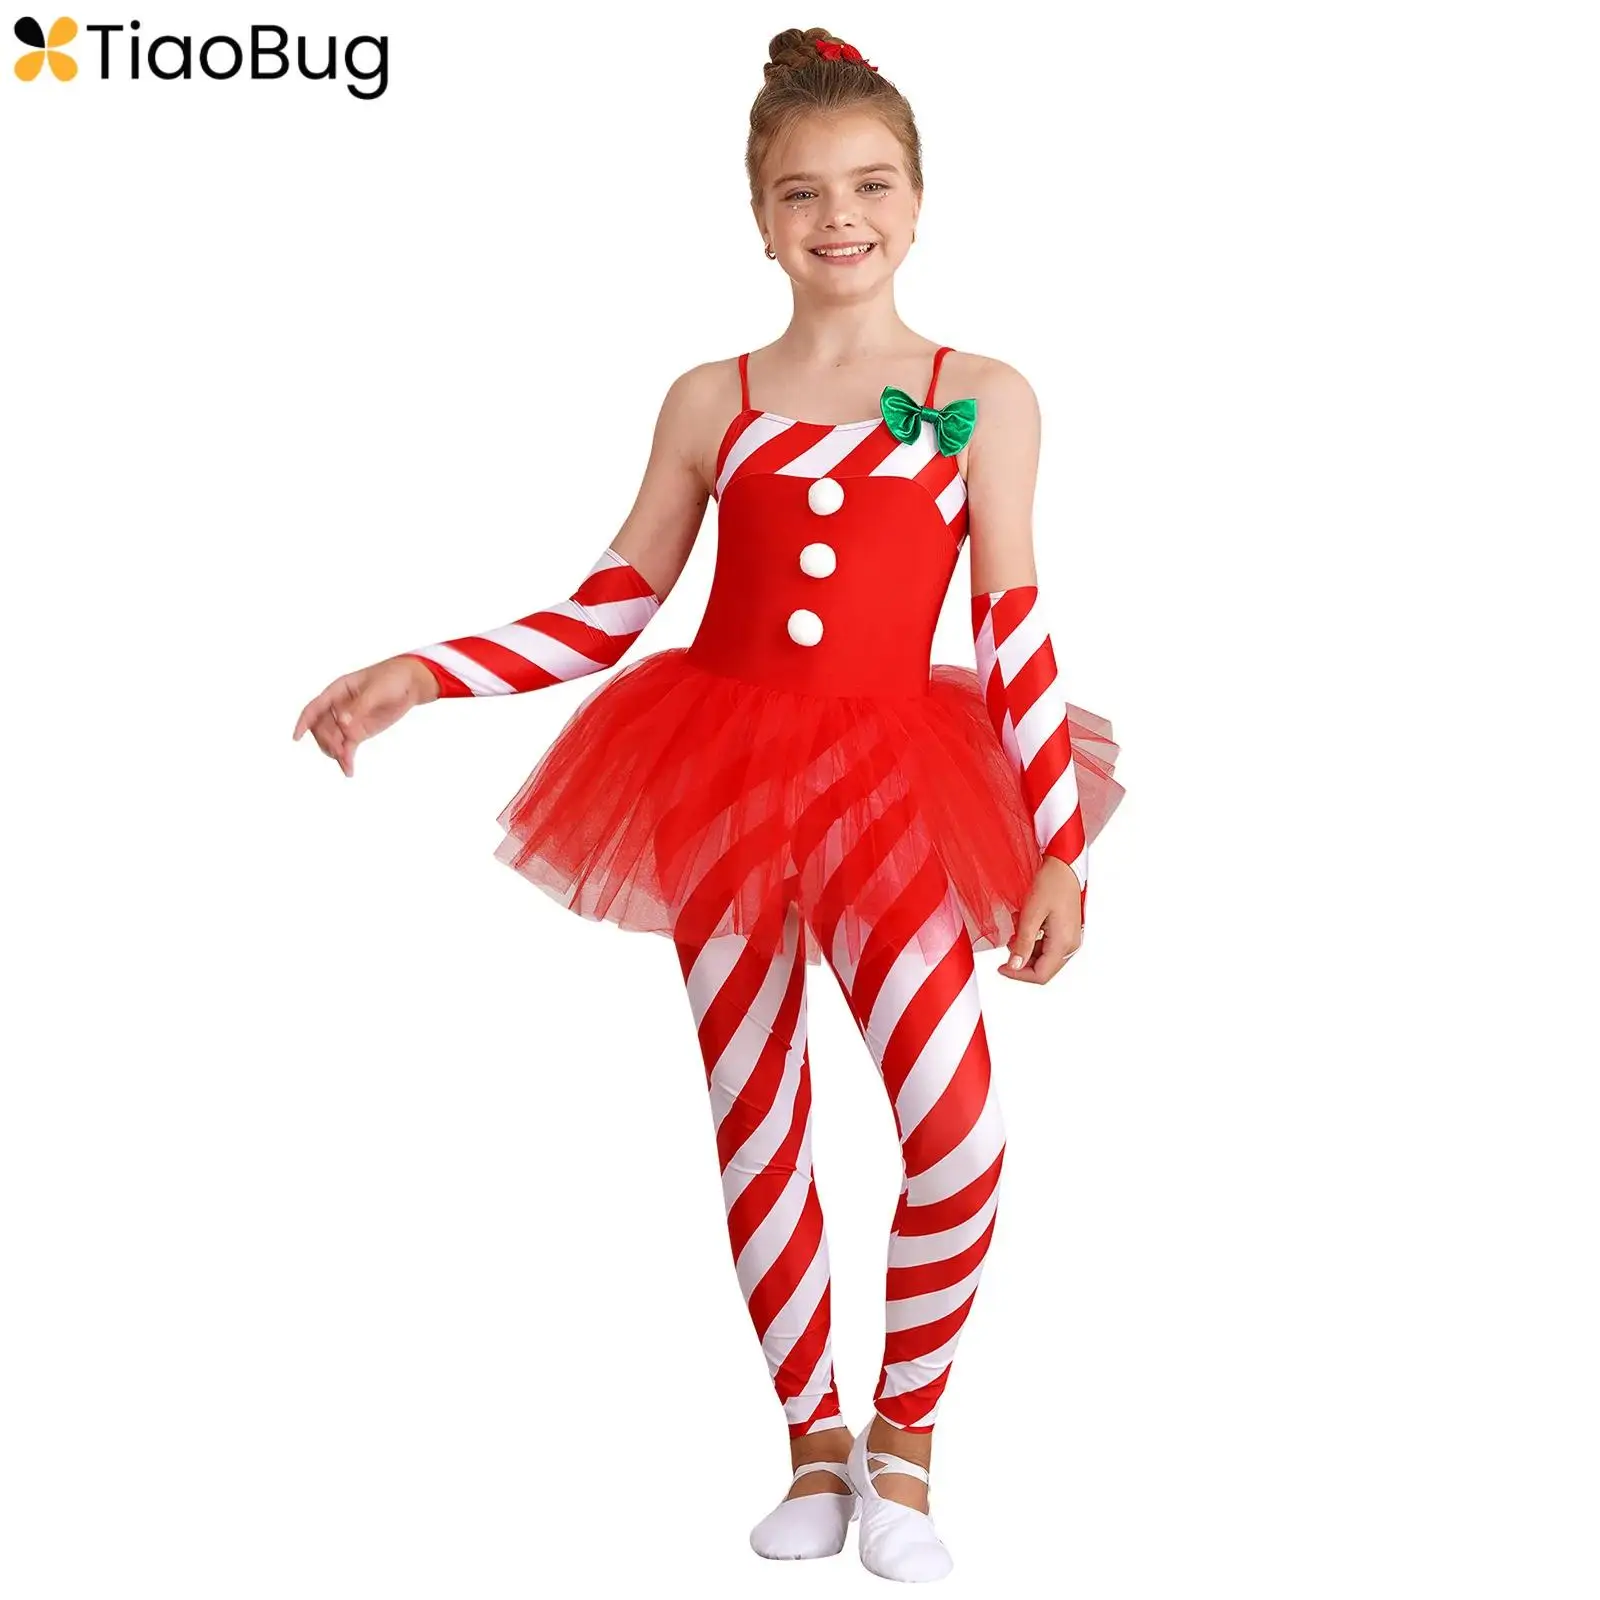 

Kids Girls Candy Cane Striped Christmas Costume Jumpsuit Xmas Mrs Claus Bodysuit Dance Gymnastic Tutu Leotard with Arm Sleeves